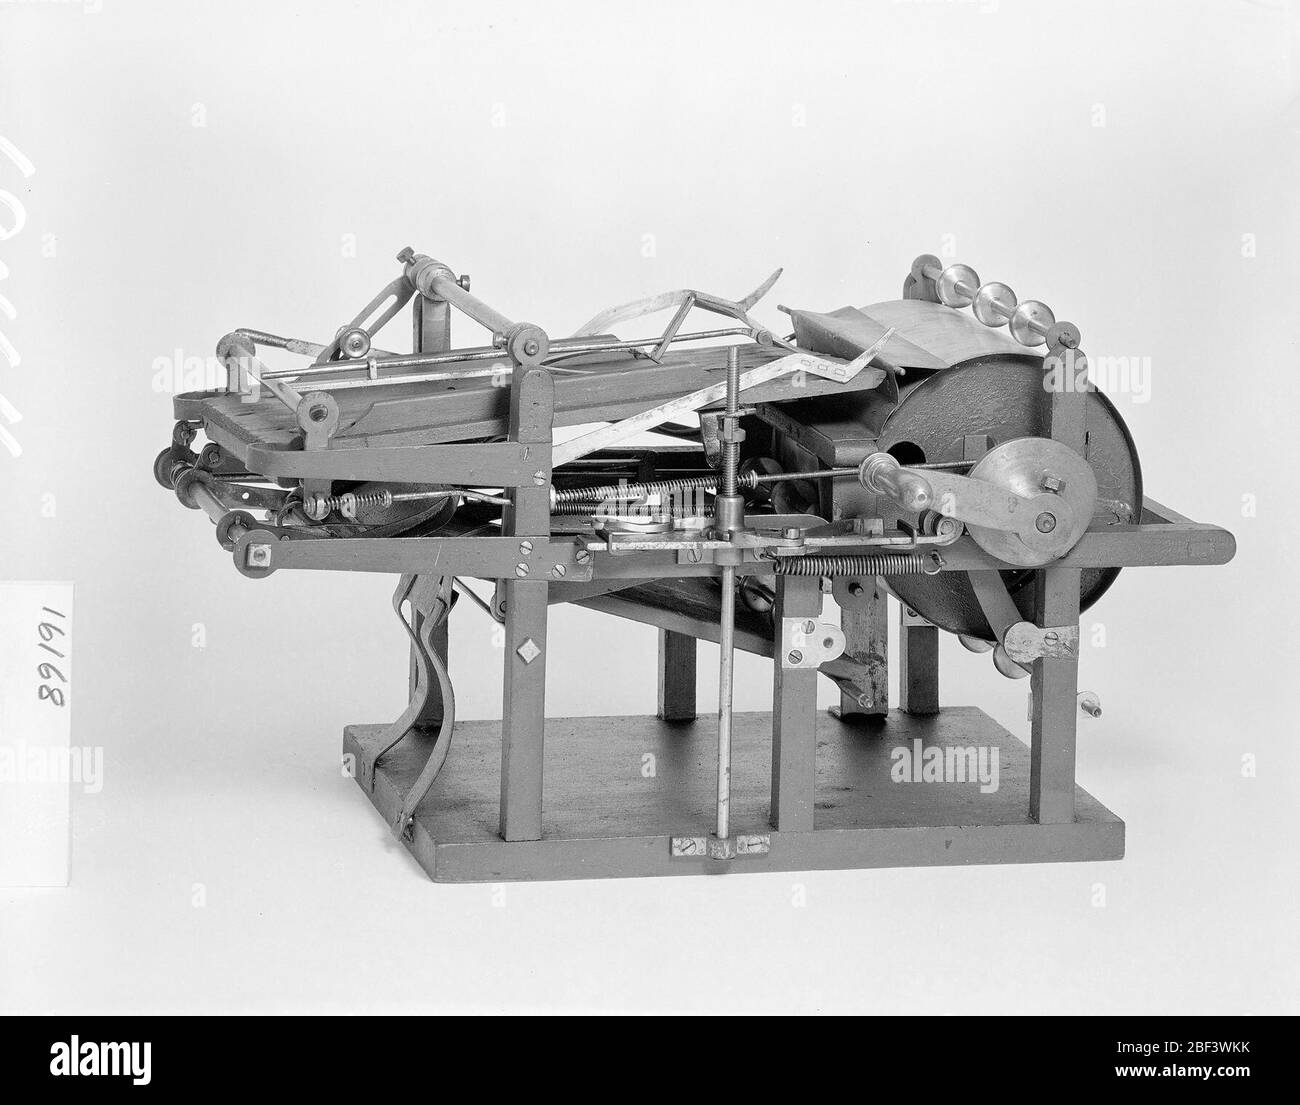 Patent Model for a SheetFeed Apparatus. This patent model demonstrates an invention for a sheet-feed apparatus which was granted patent number 16168. The patent covered both the paper feeder to handle folded sheets, and the folding apparatus.Currently not on view Stock Photo